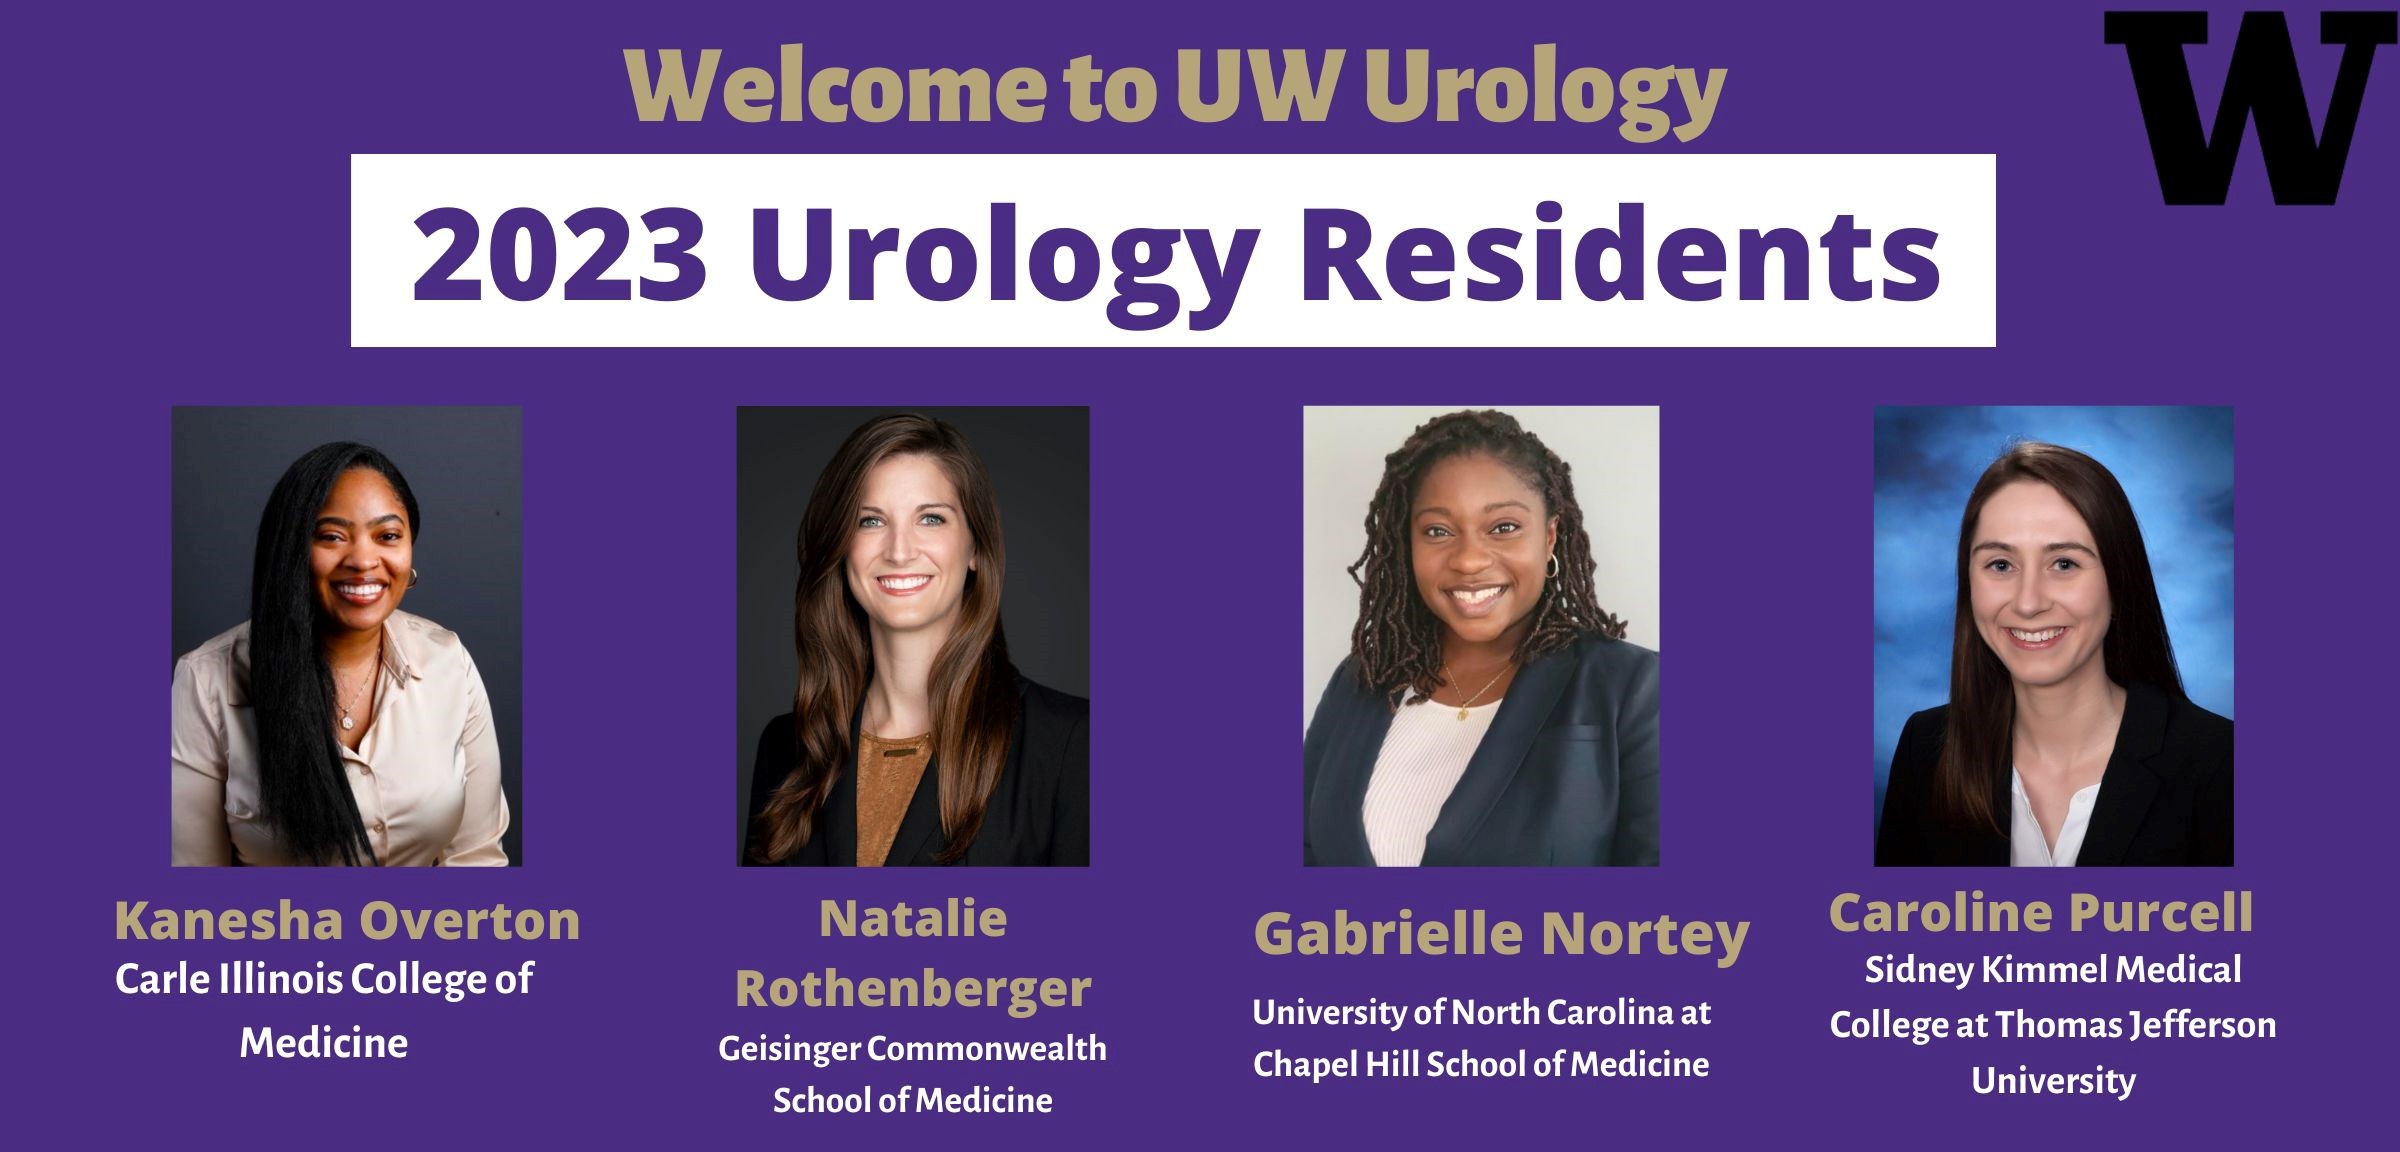 Graphic of 2023 Urology Residents